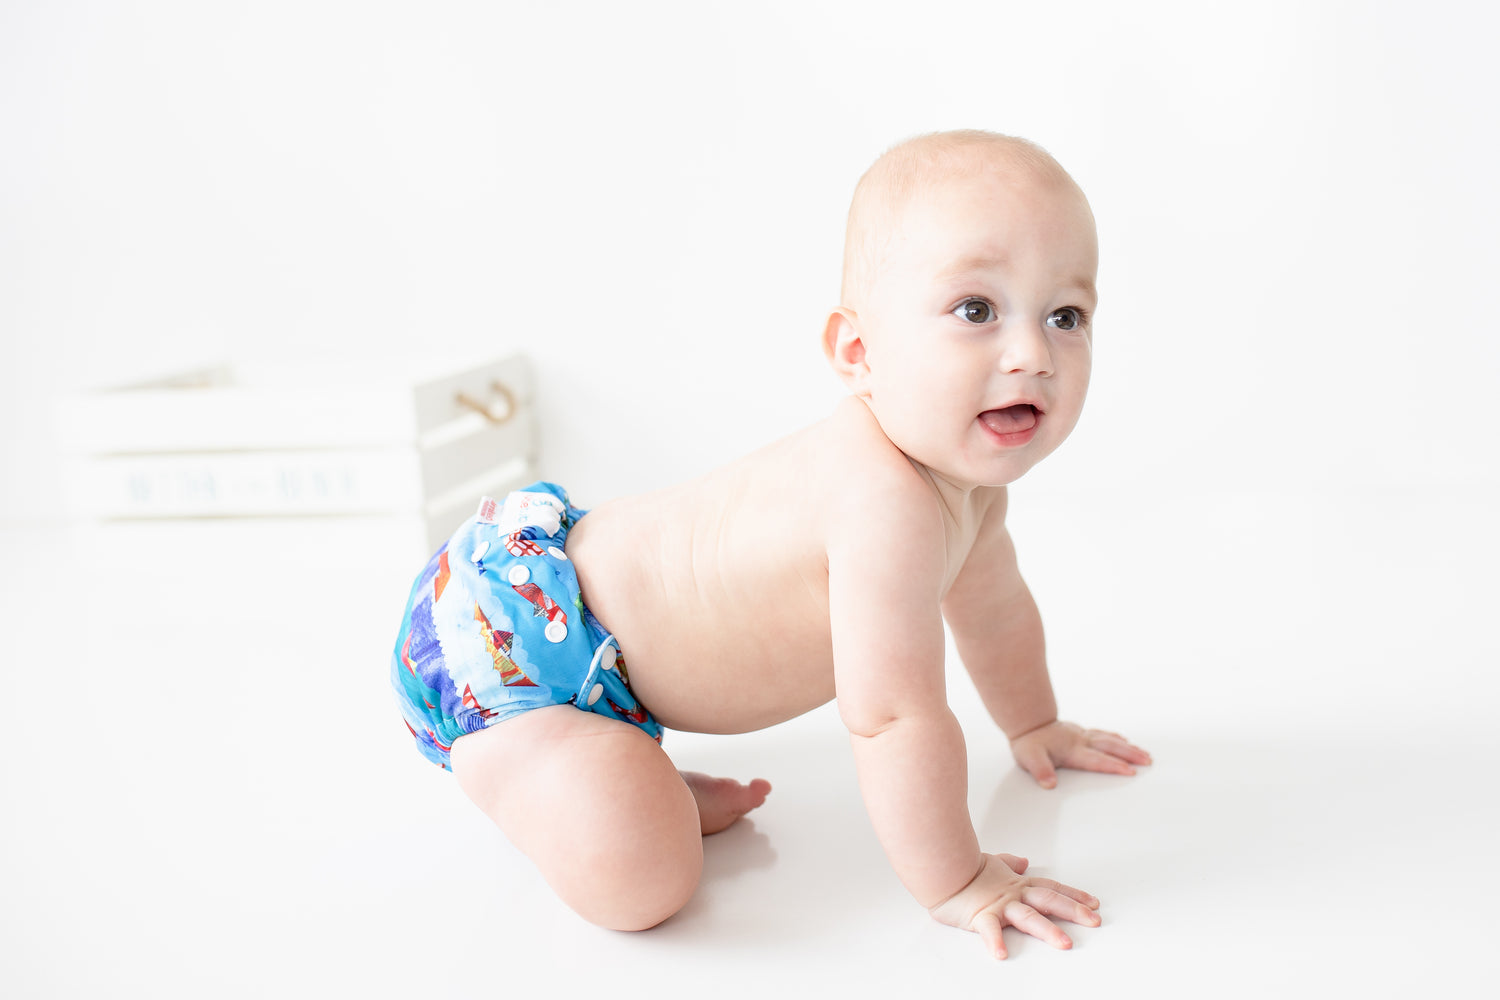 A crawling happy baby wearing a Bubblebubs Candie cloth nappy. He looks like he is still learning to crawl as he stumbles wearing his blue reusable nappy.